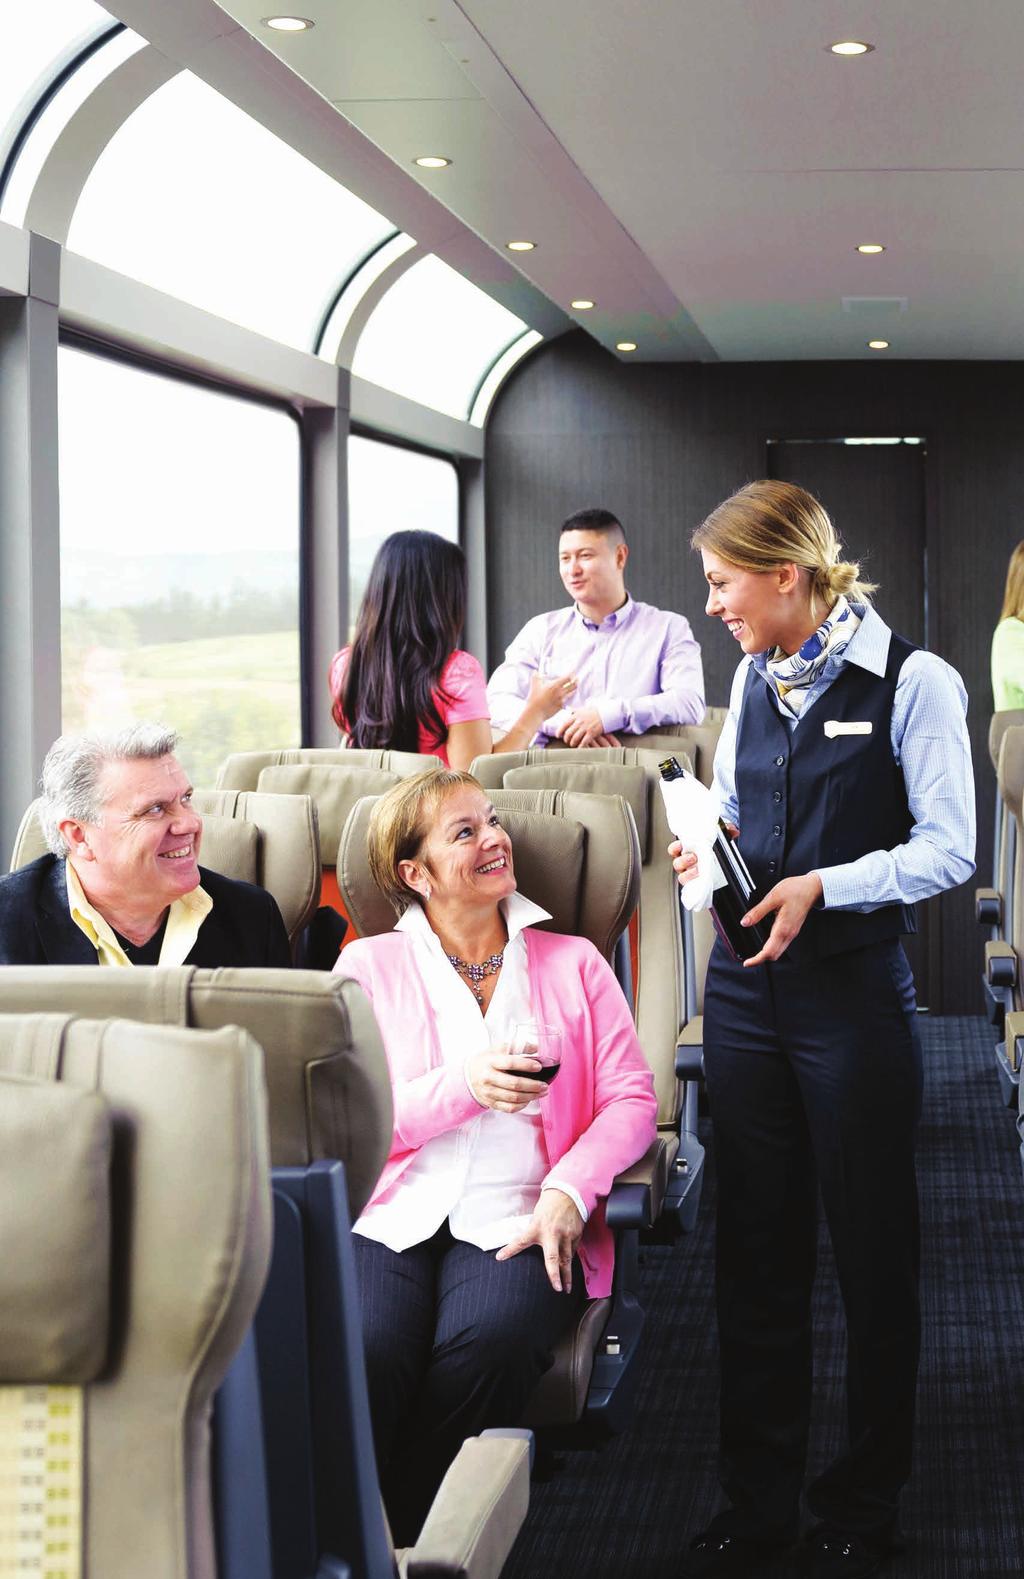 04 ONBOARD ROCKY MOUNTAINEER When You Return Home 08 To provide the highest level of service and comfort, each guest will be assigned a specific seat and coach for their rail journey.